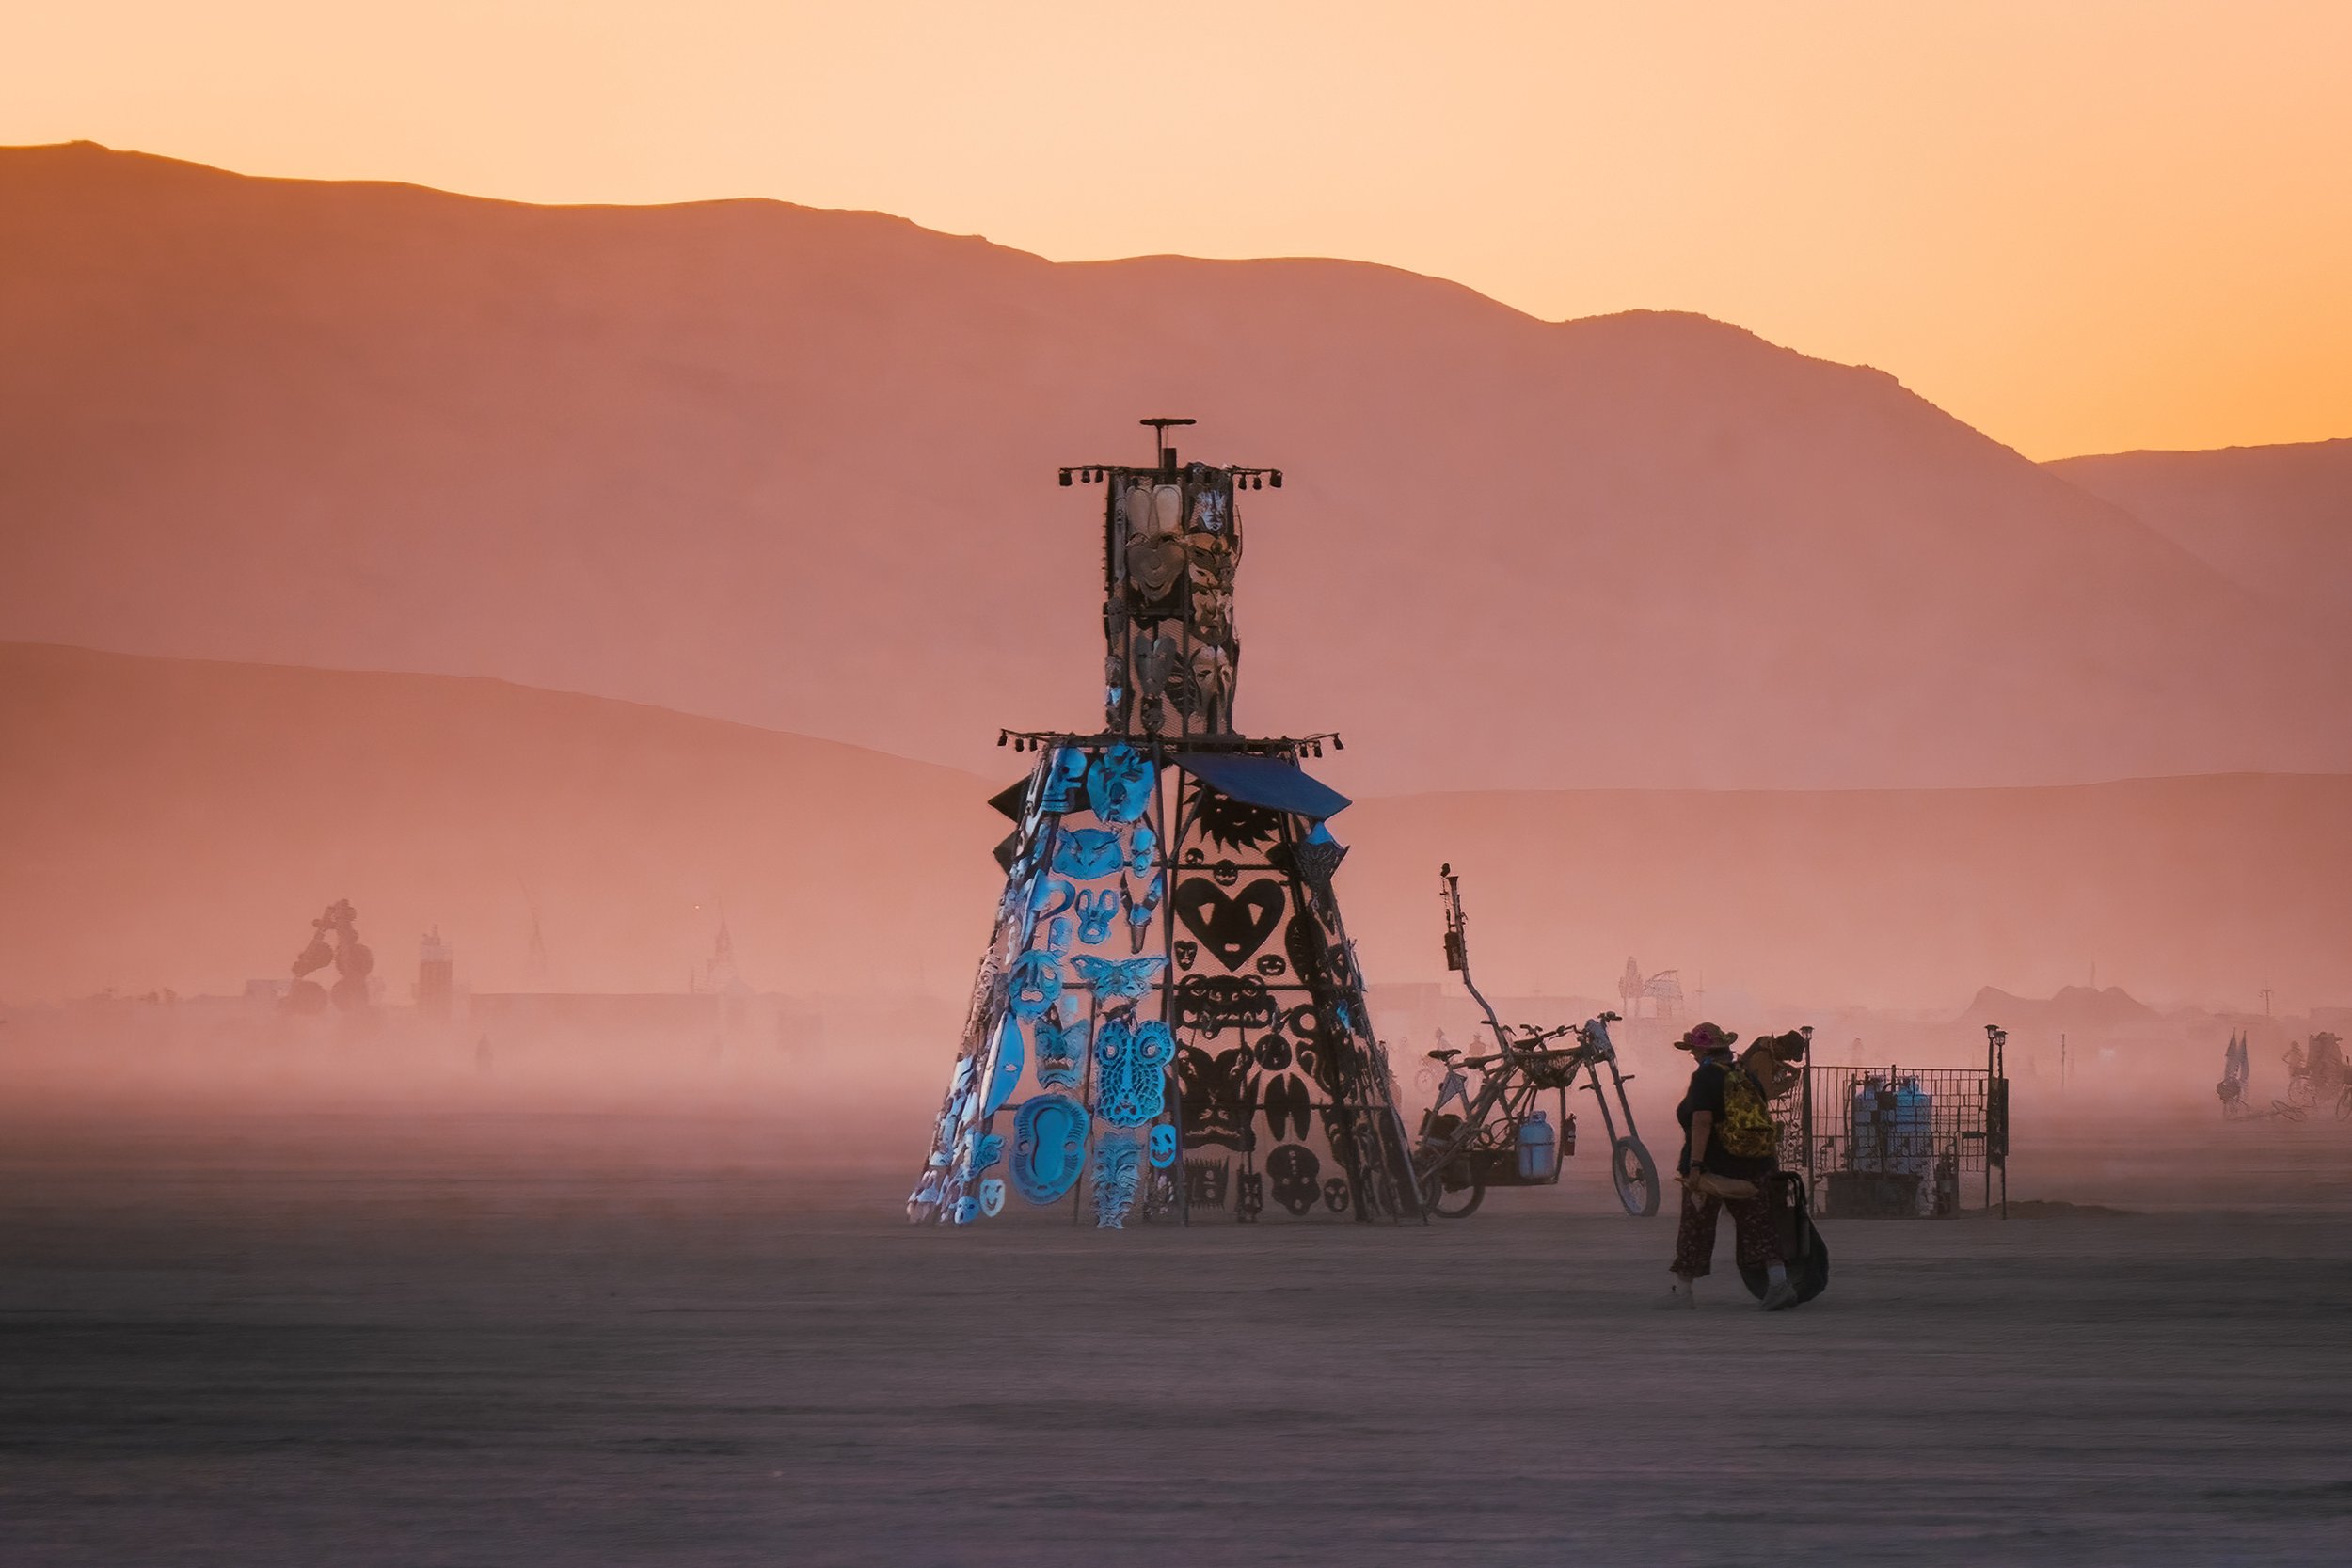 Burning Man 2022 - A Temple of Masks